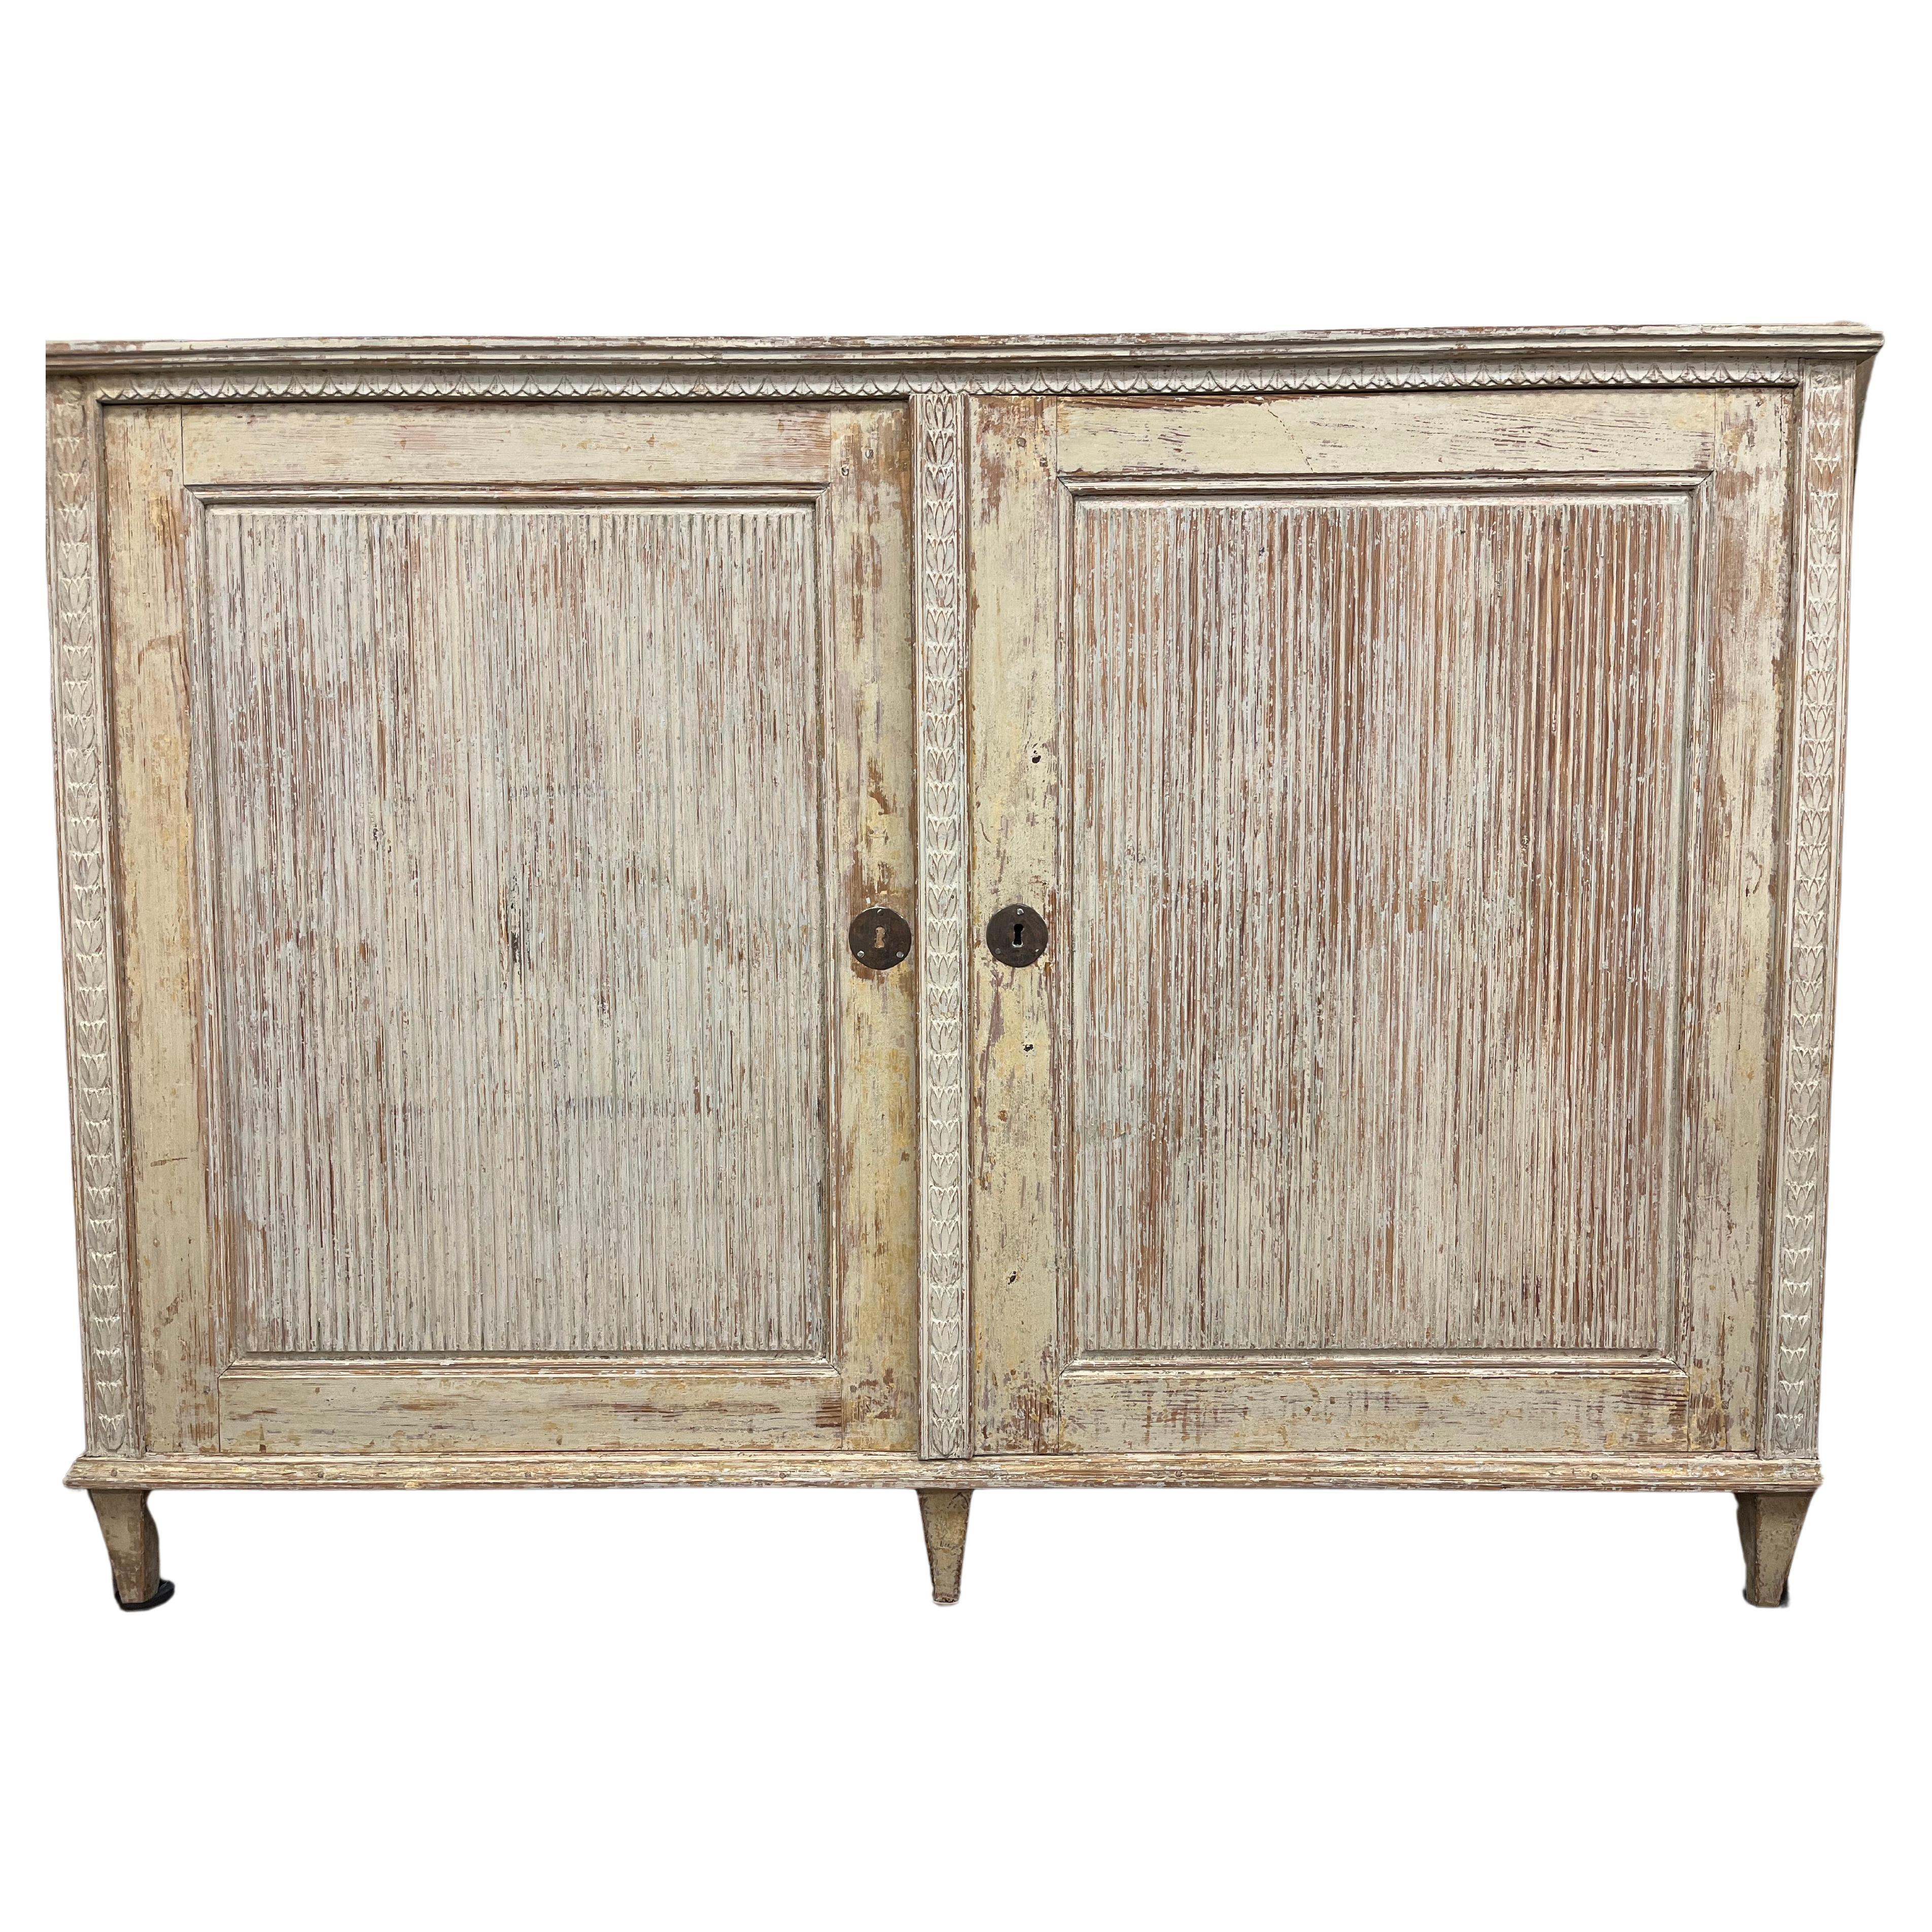 A beautiful Swedish Gustavian sideboard made in Angermanland with elaborate wood carvings – reeded door fronts, leaf cut detail at the top and wheat sheath décor on the sides. Interior has three shelves. Neatly scraped to its original cream colored